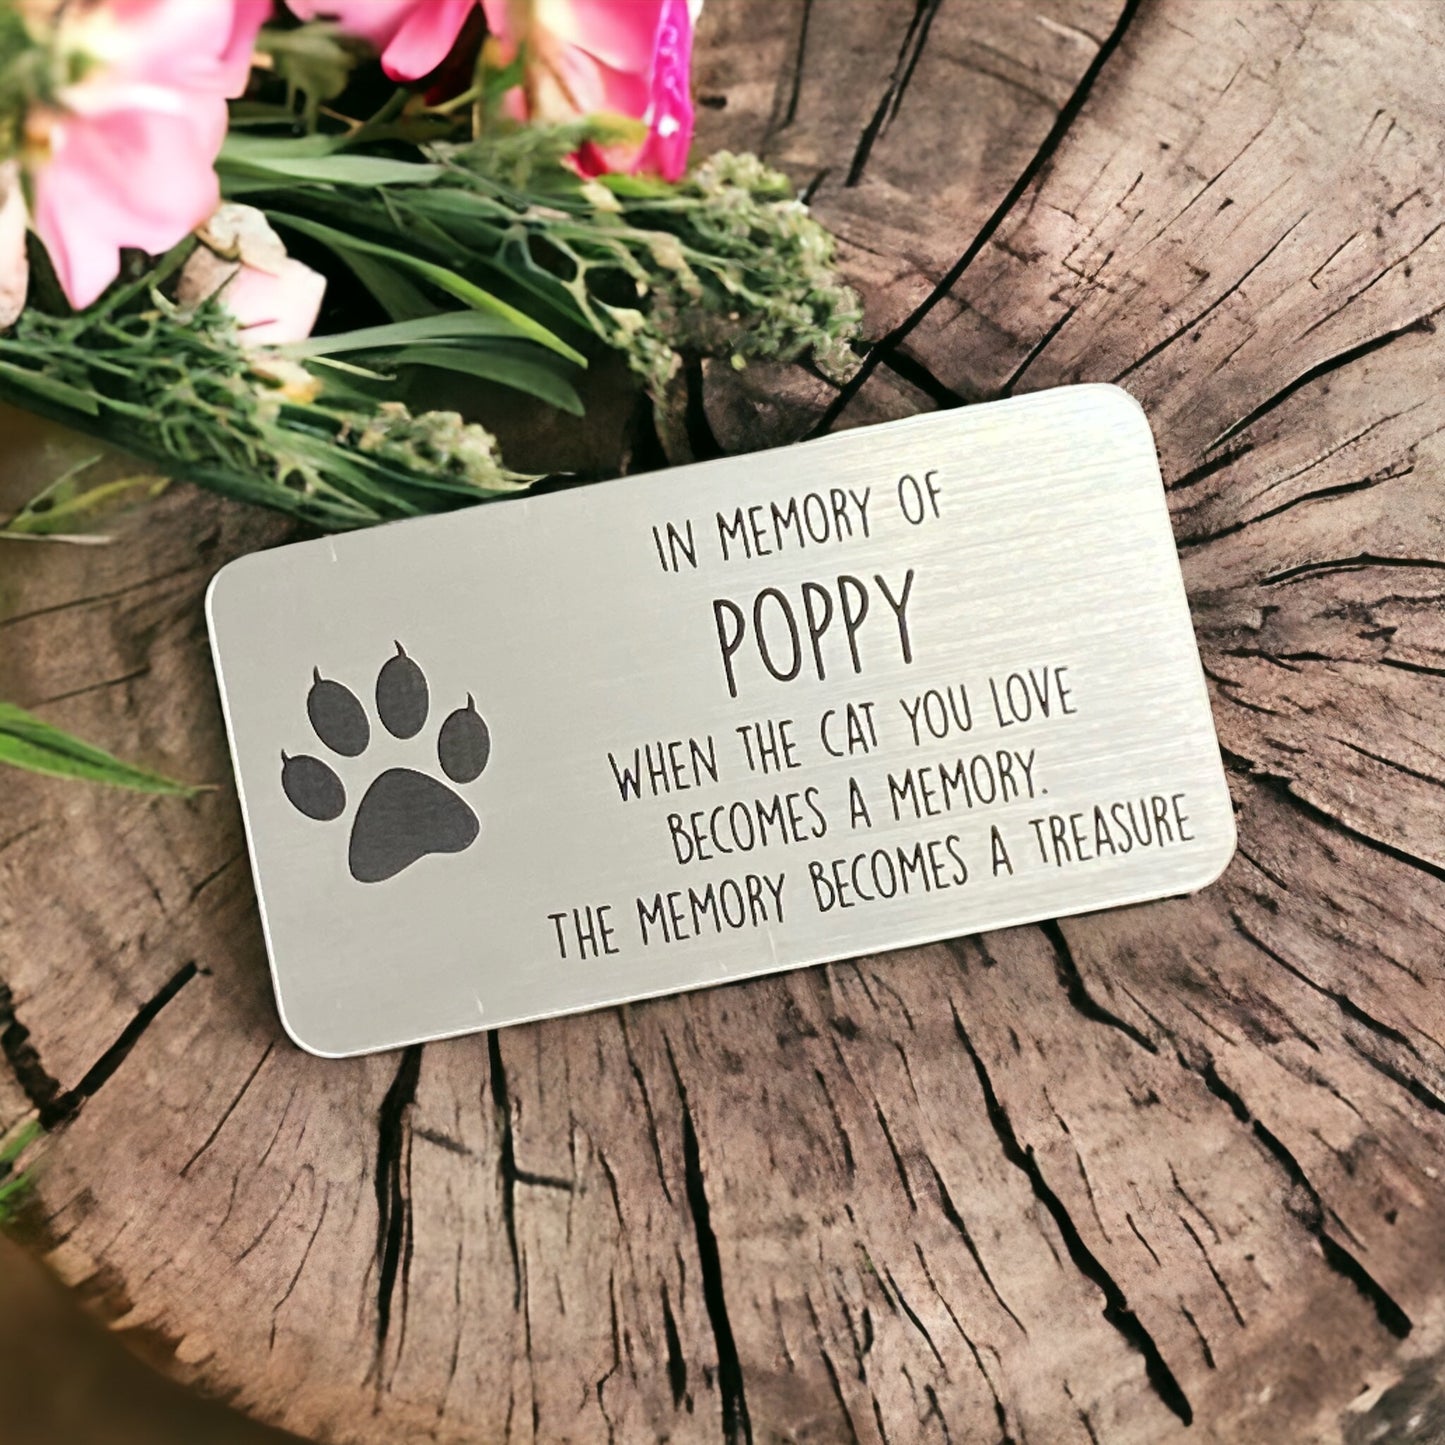 Engraved Memorial Plaque For Pet Cat - For Bench, Grave Marker Or Tree